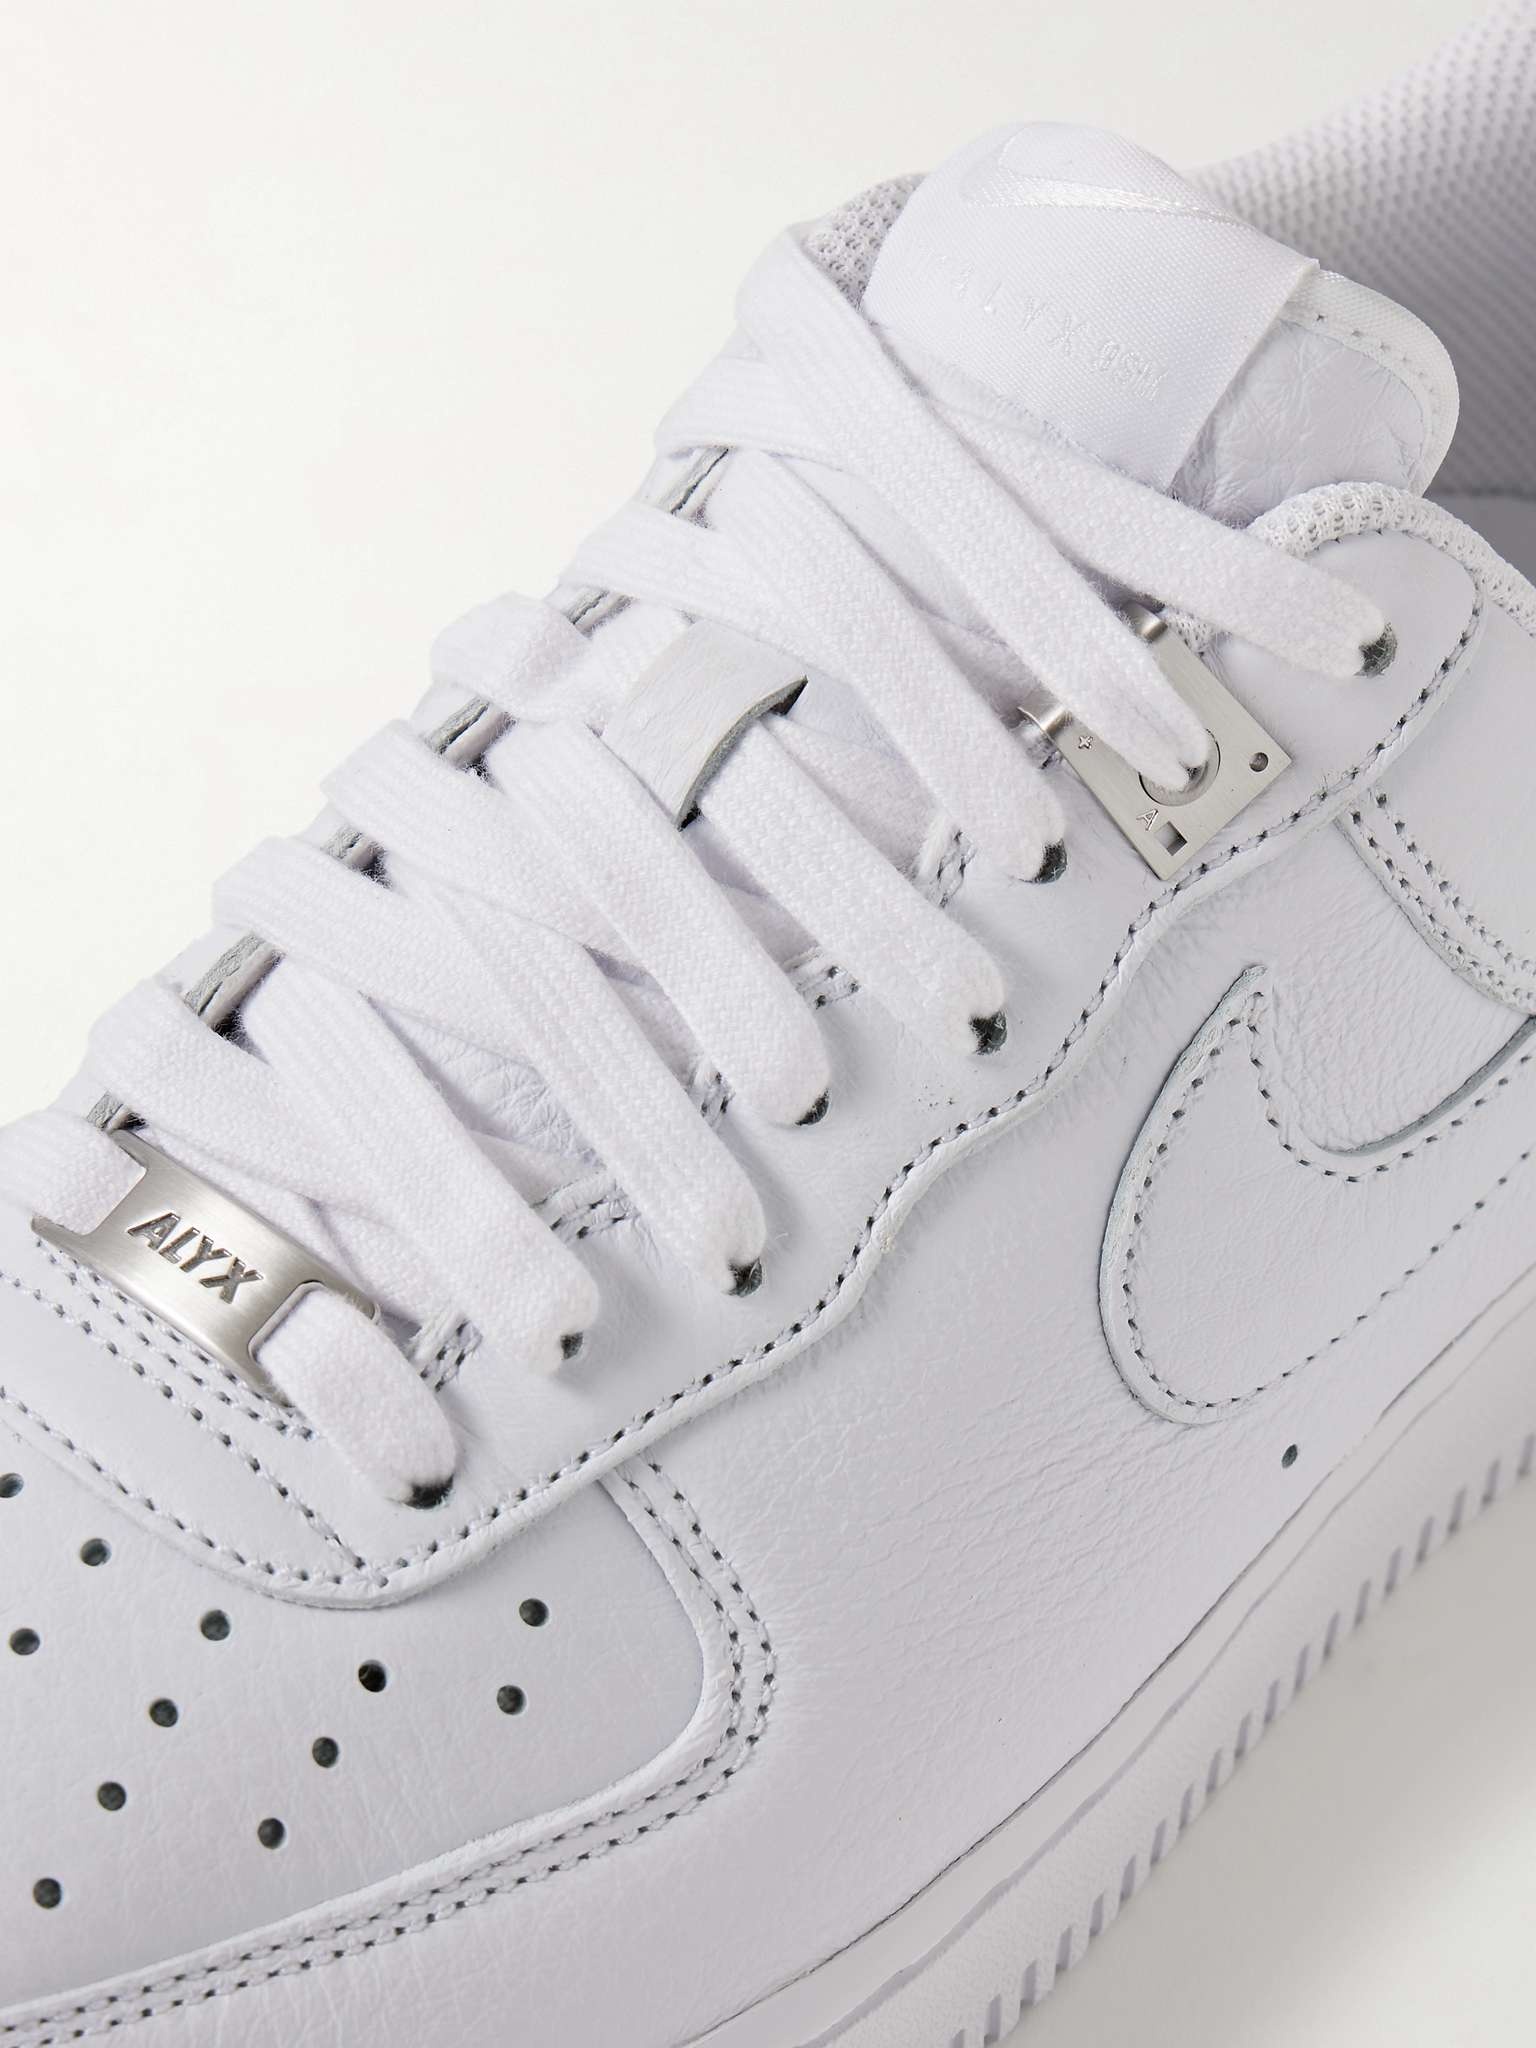 + 1017 ALYX 9SM Air Force 1 SP Leather Sneakers - 6